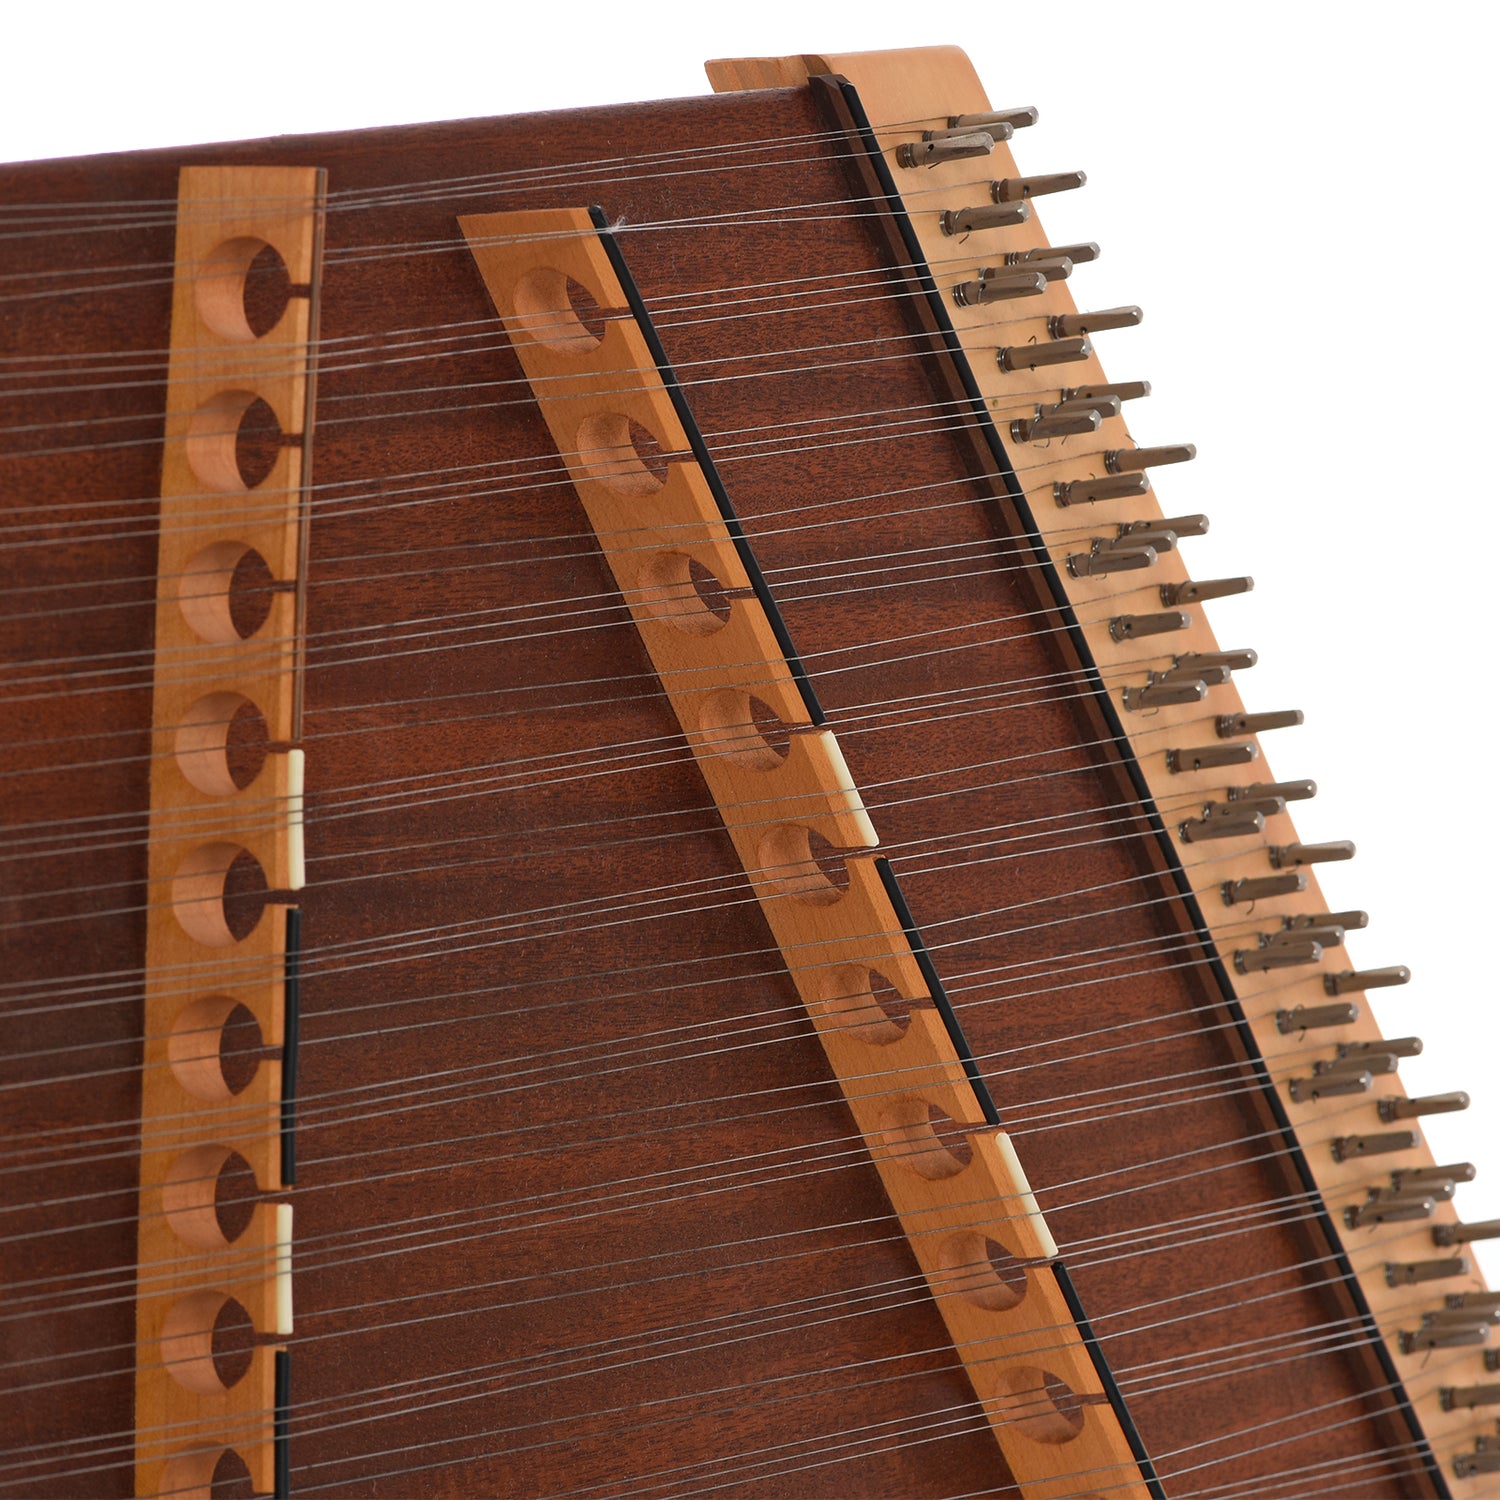 How Often Do Strings Need Changing On A Hammered Dulcimer